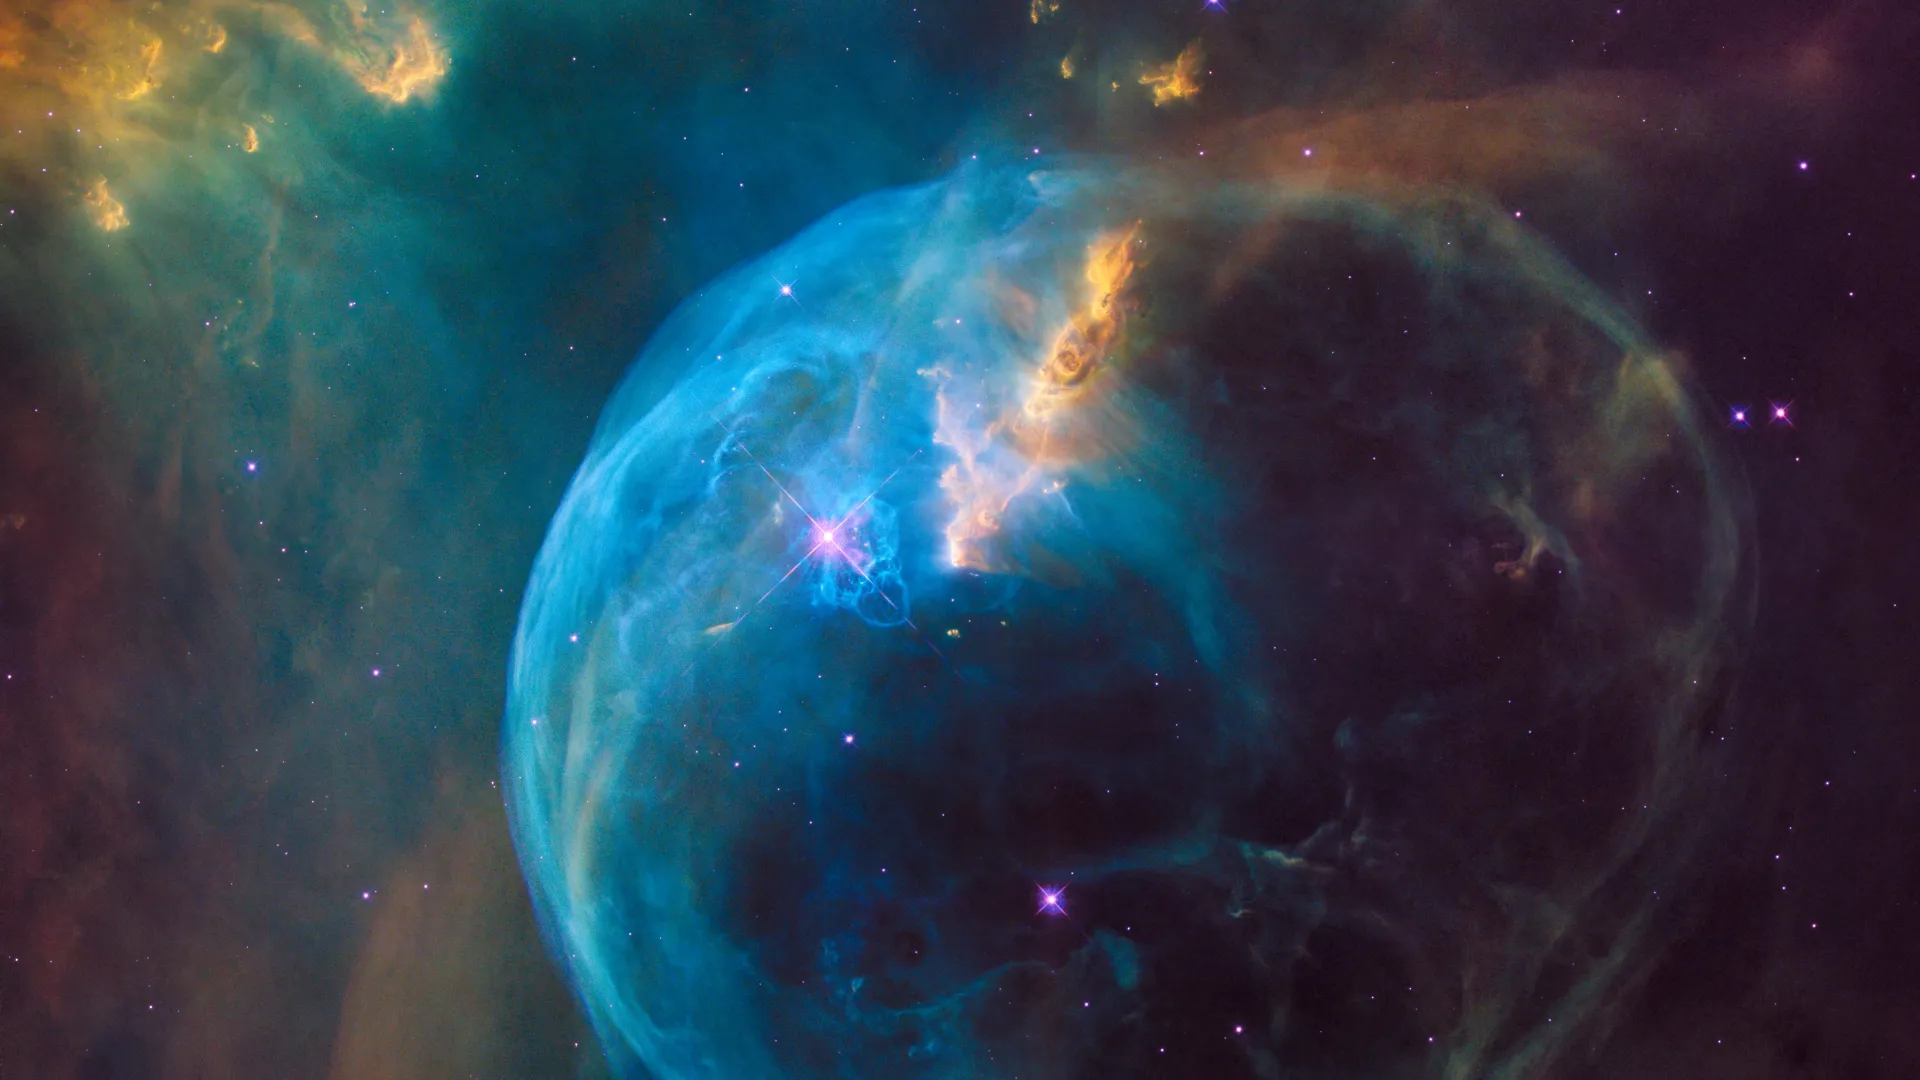 The Bubble Nebula is 7 light-years across – about one-and-a-half times the distance from our sun to its nearest stellar neighbor, Alpha Centauri – and resides 7,100 light-years from Earth in the constellation Cassiopeia.